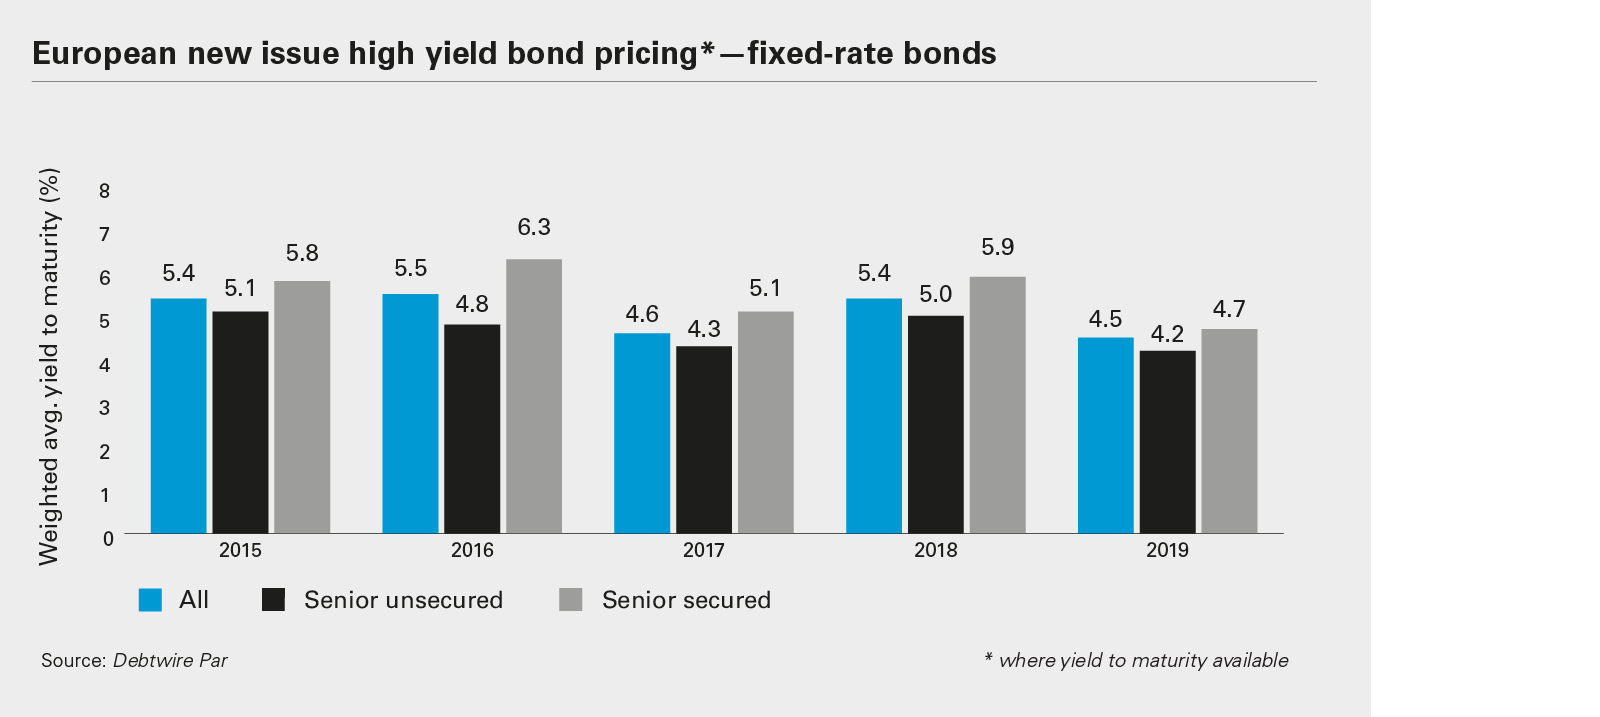 European new issue high yield bond pricing* - Fixed-rate bonds